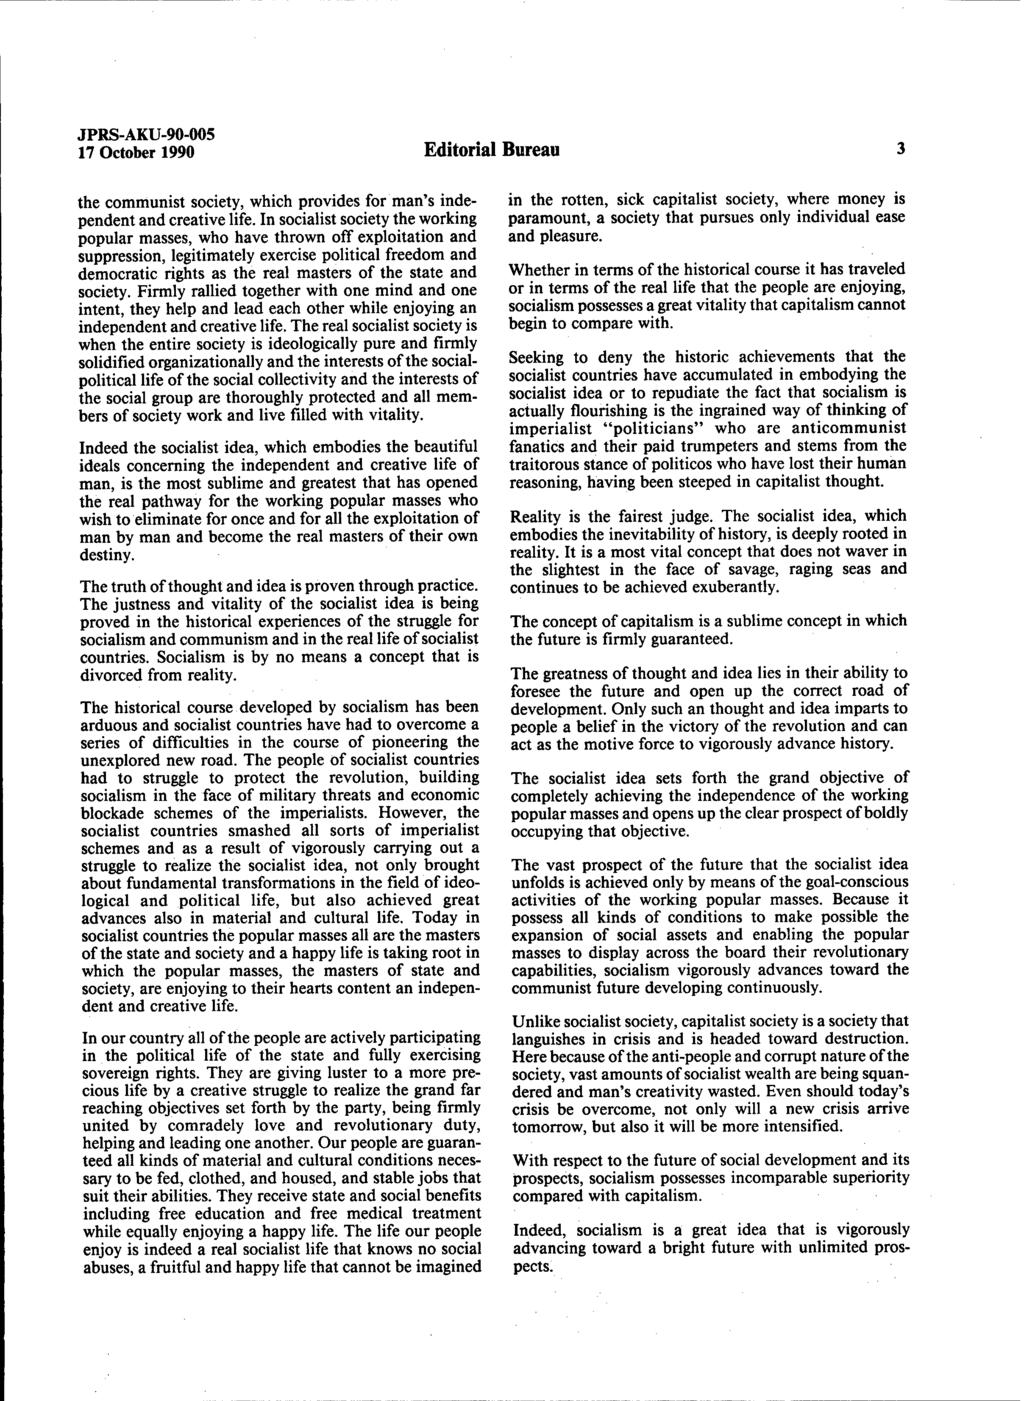 JPRS-AKU-90-005 17 October 1990 Editorial Bureau the communist society, which provides for man's independent and creative life.